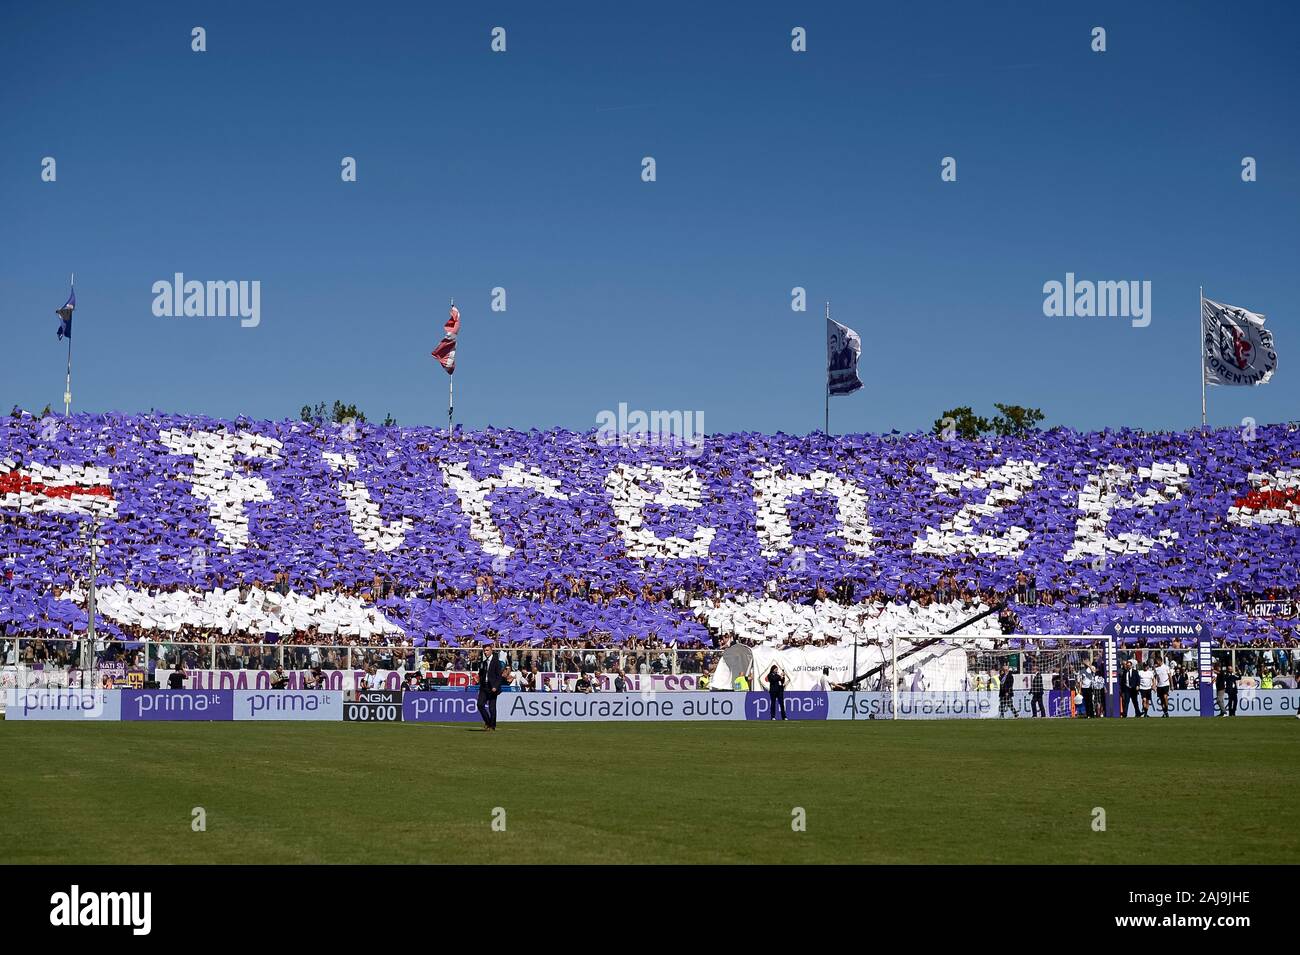 Florence, Italy. 14 September, 2019: Fans of ACF Fiorentina show their support prior to the Serie A football match between ACF Fiorentina and Juventus FC. The match ended in a 0-0 tie. Credit: Nicolò Campo/Alamy Live News Stock Photo